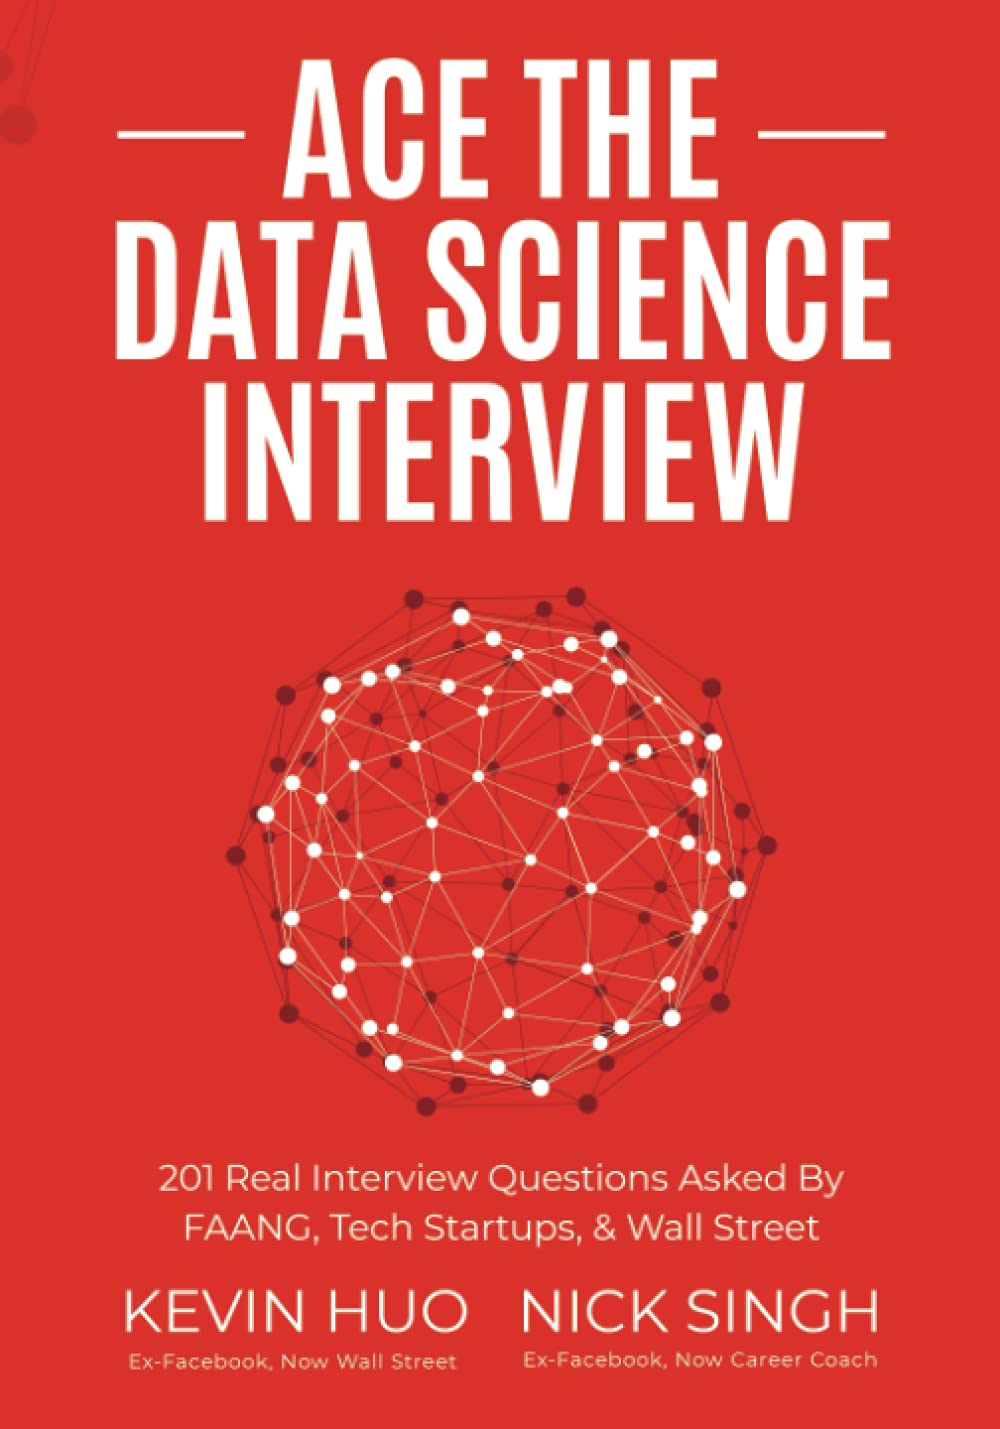 Ace the Data Science Interview: 201 Real Interview Questions Asked By FAANG, Tech Startups, & Wall Street (Paperback)